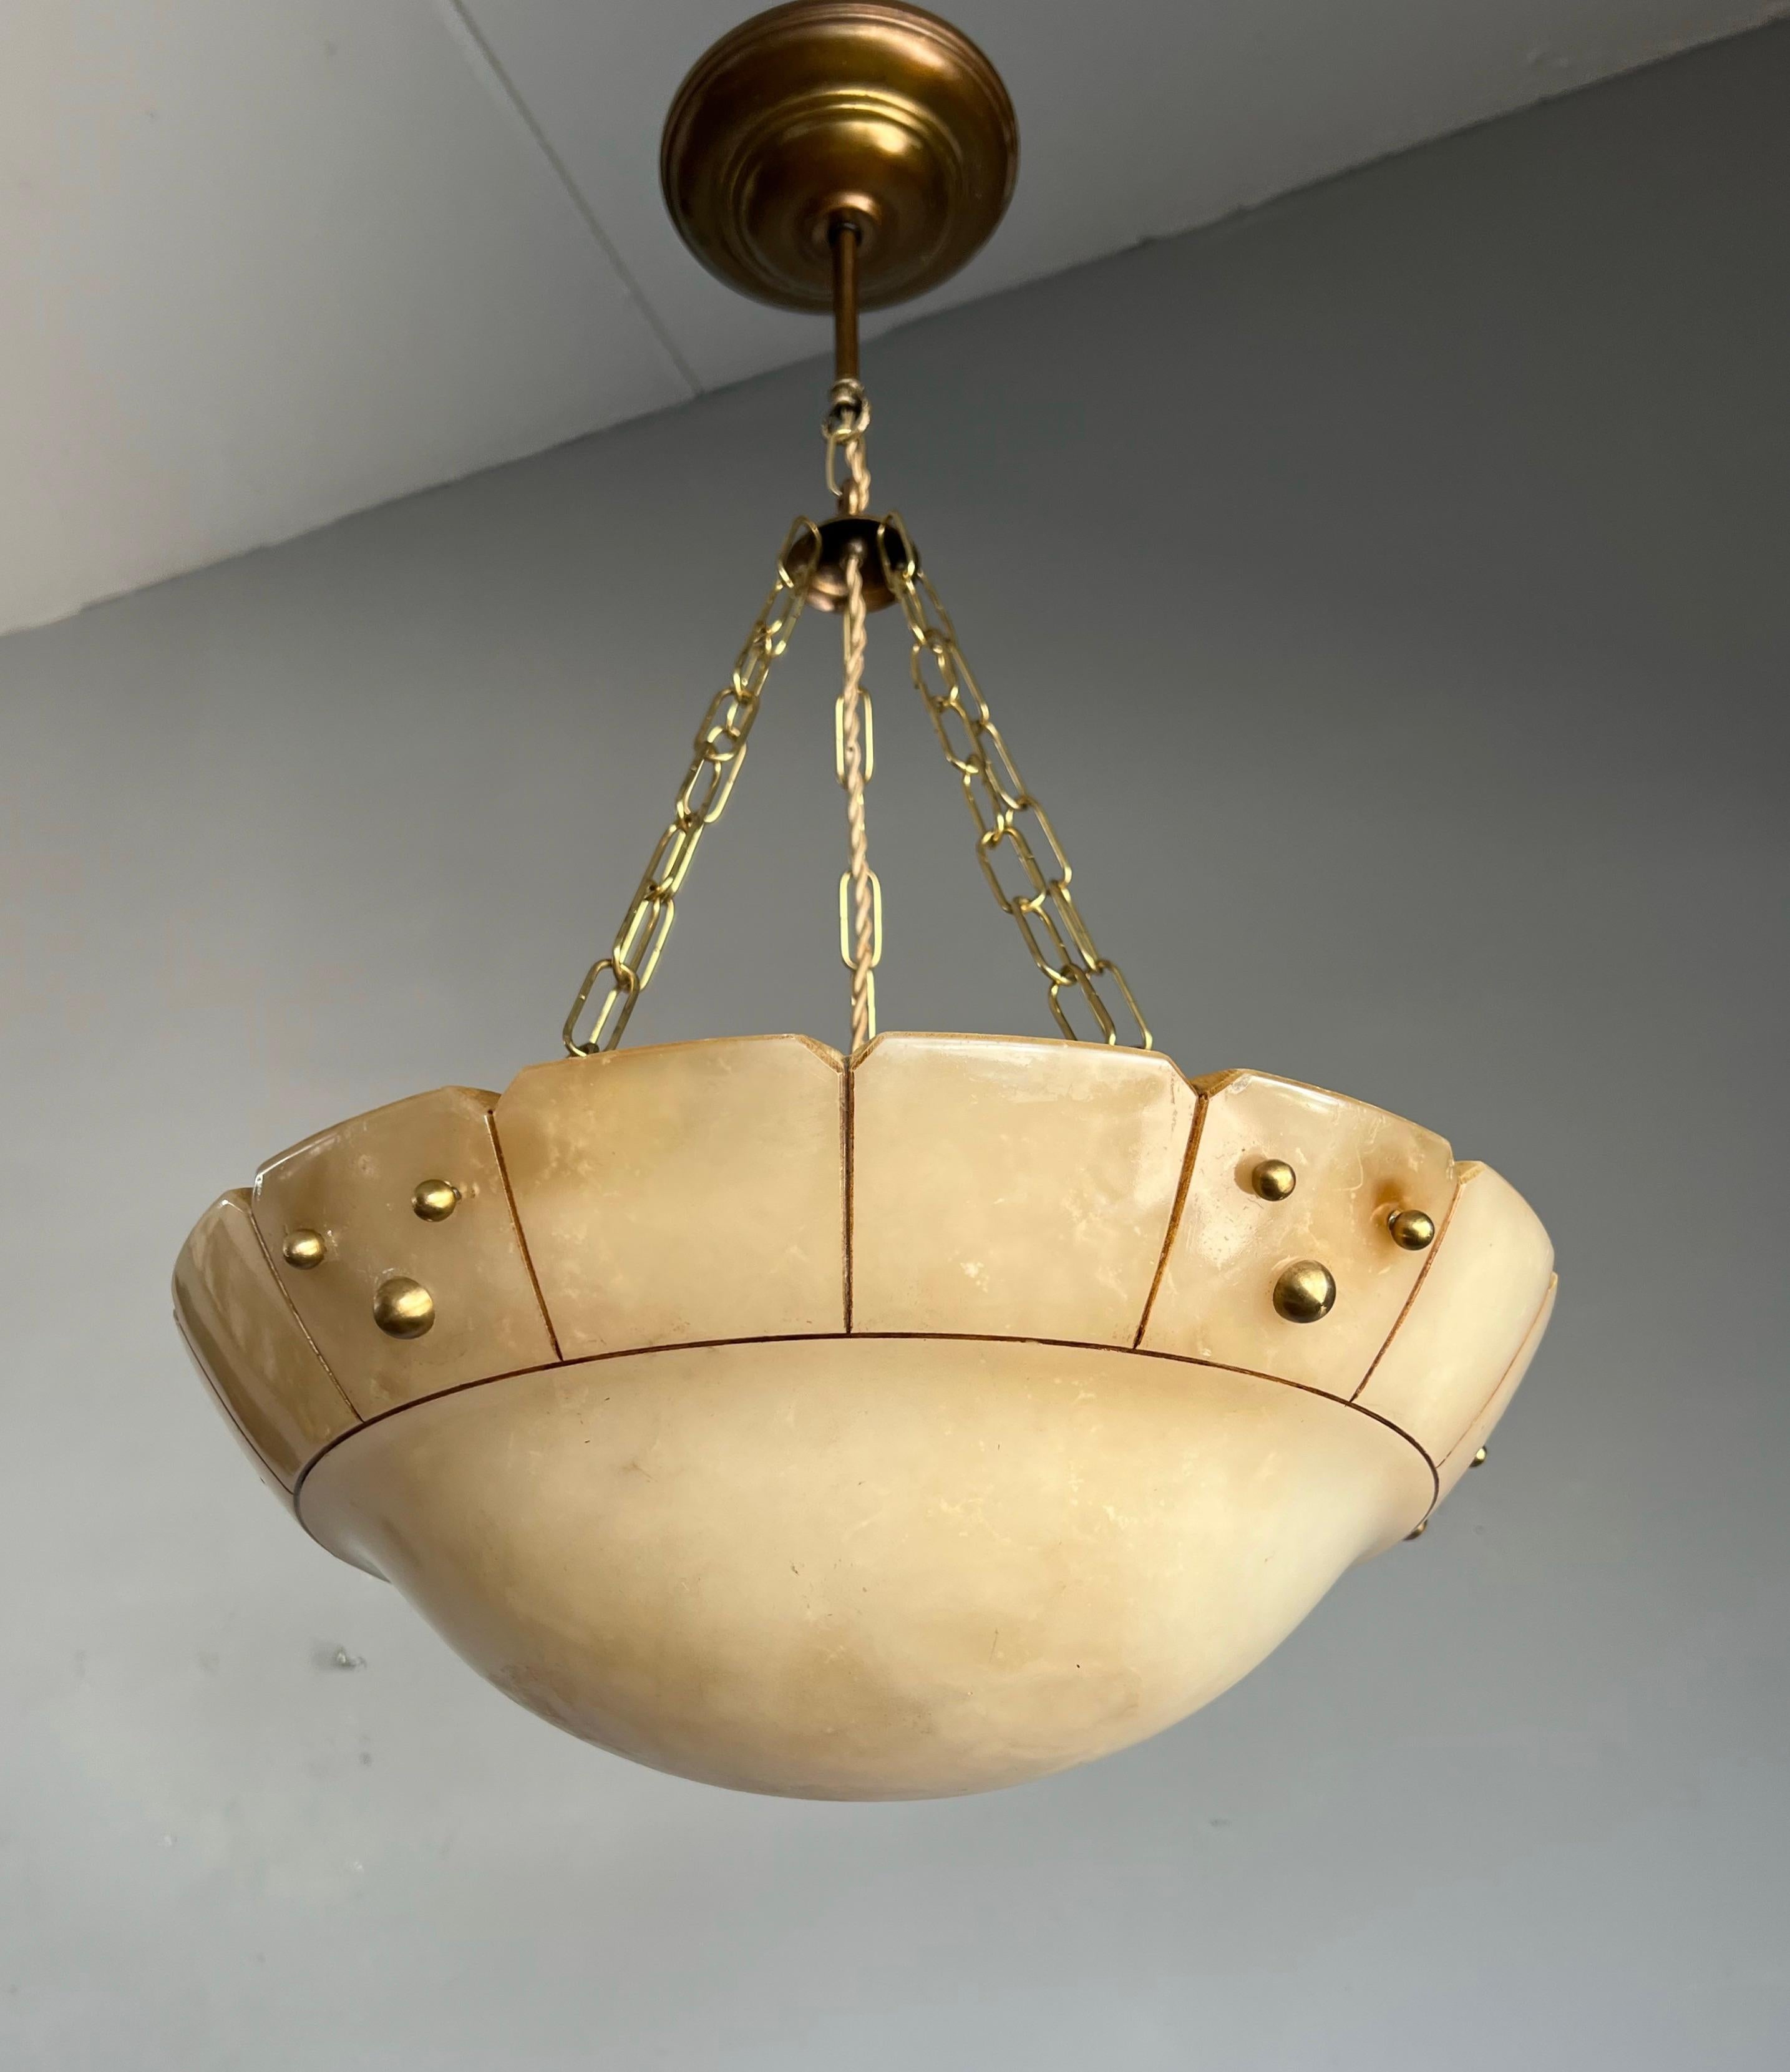 Stunning design and warm color alabaster and brass light fixture.

This timeless and ideal size antique pendant from the early 1900s is an absolute joy to come home to. The beautifully rounded, deep and rare color beige alabaster bowl has various